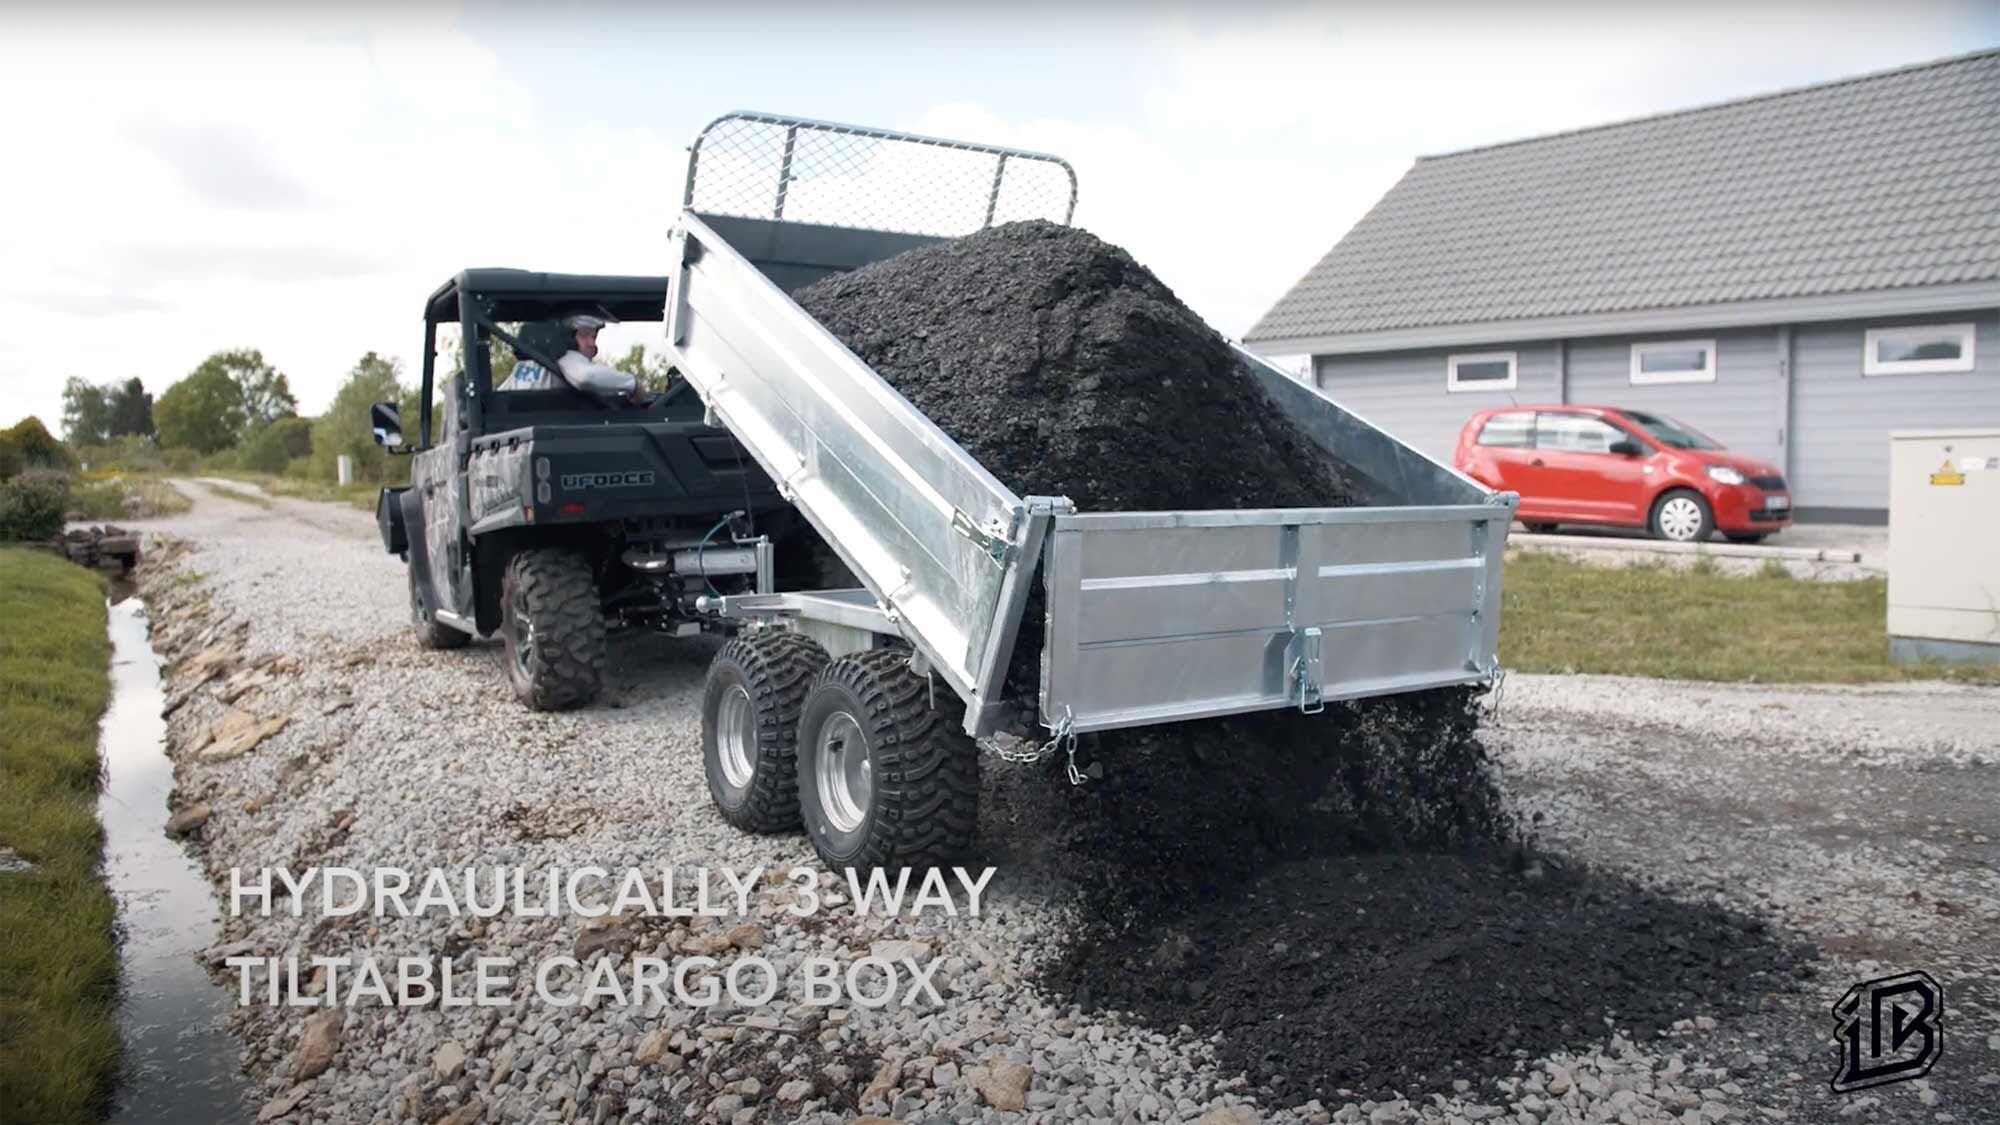 The hydraulic three-way tilt trailer lets workers shuttle materials around property and unload quickly, saving time.